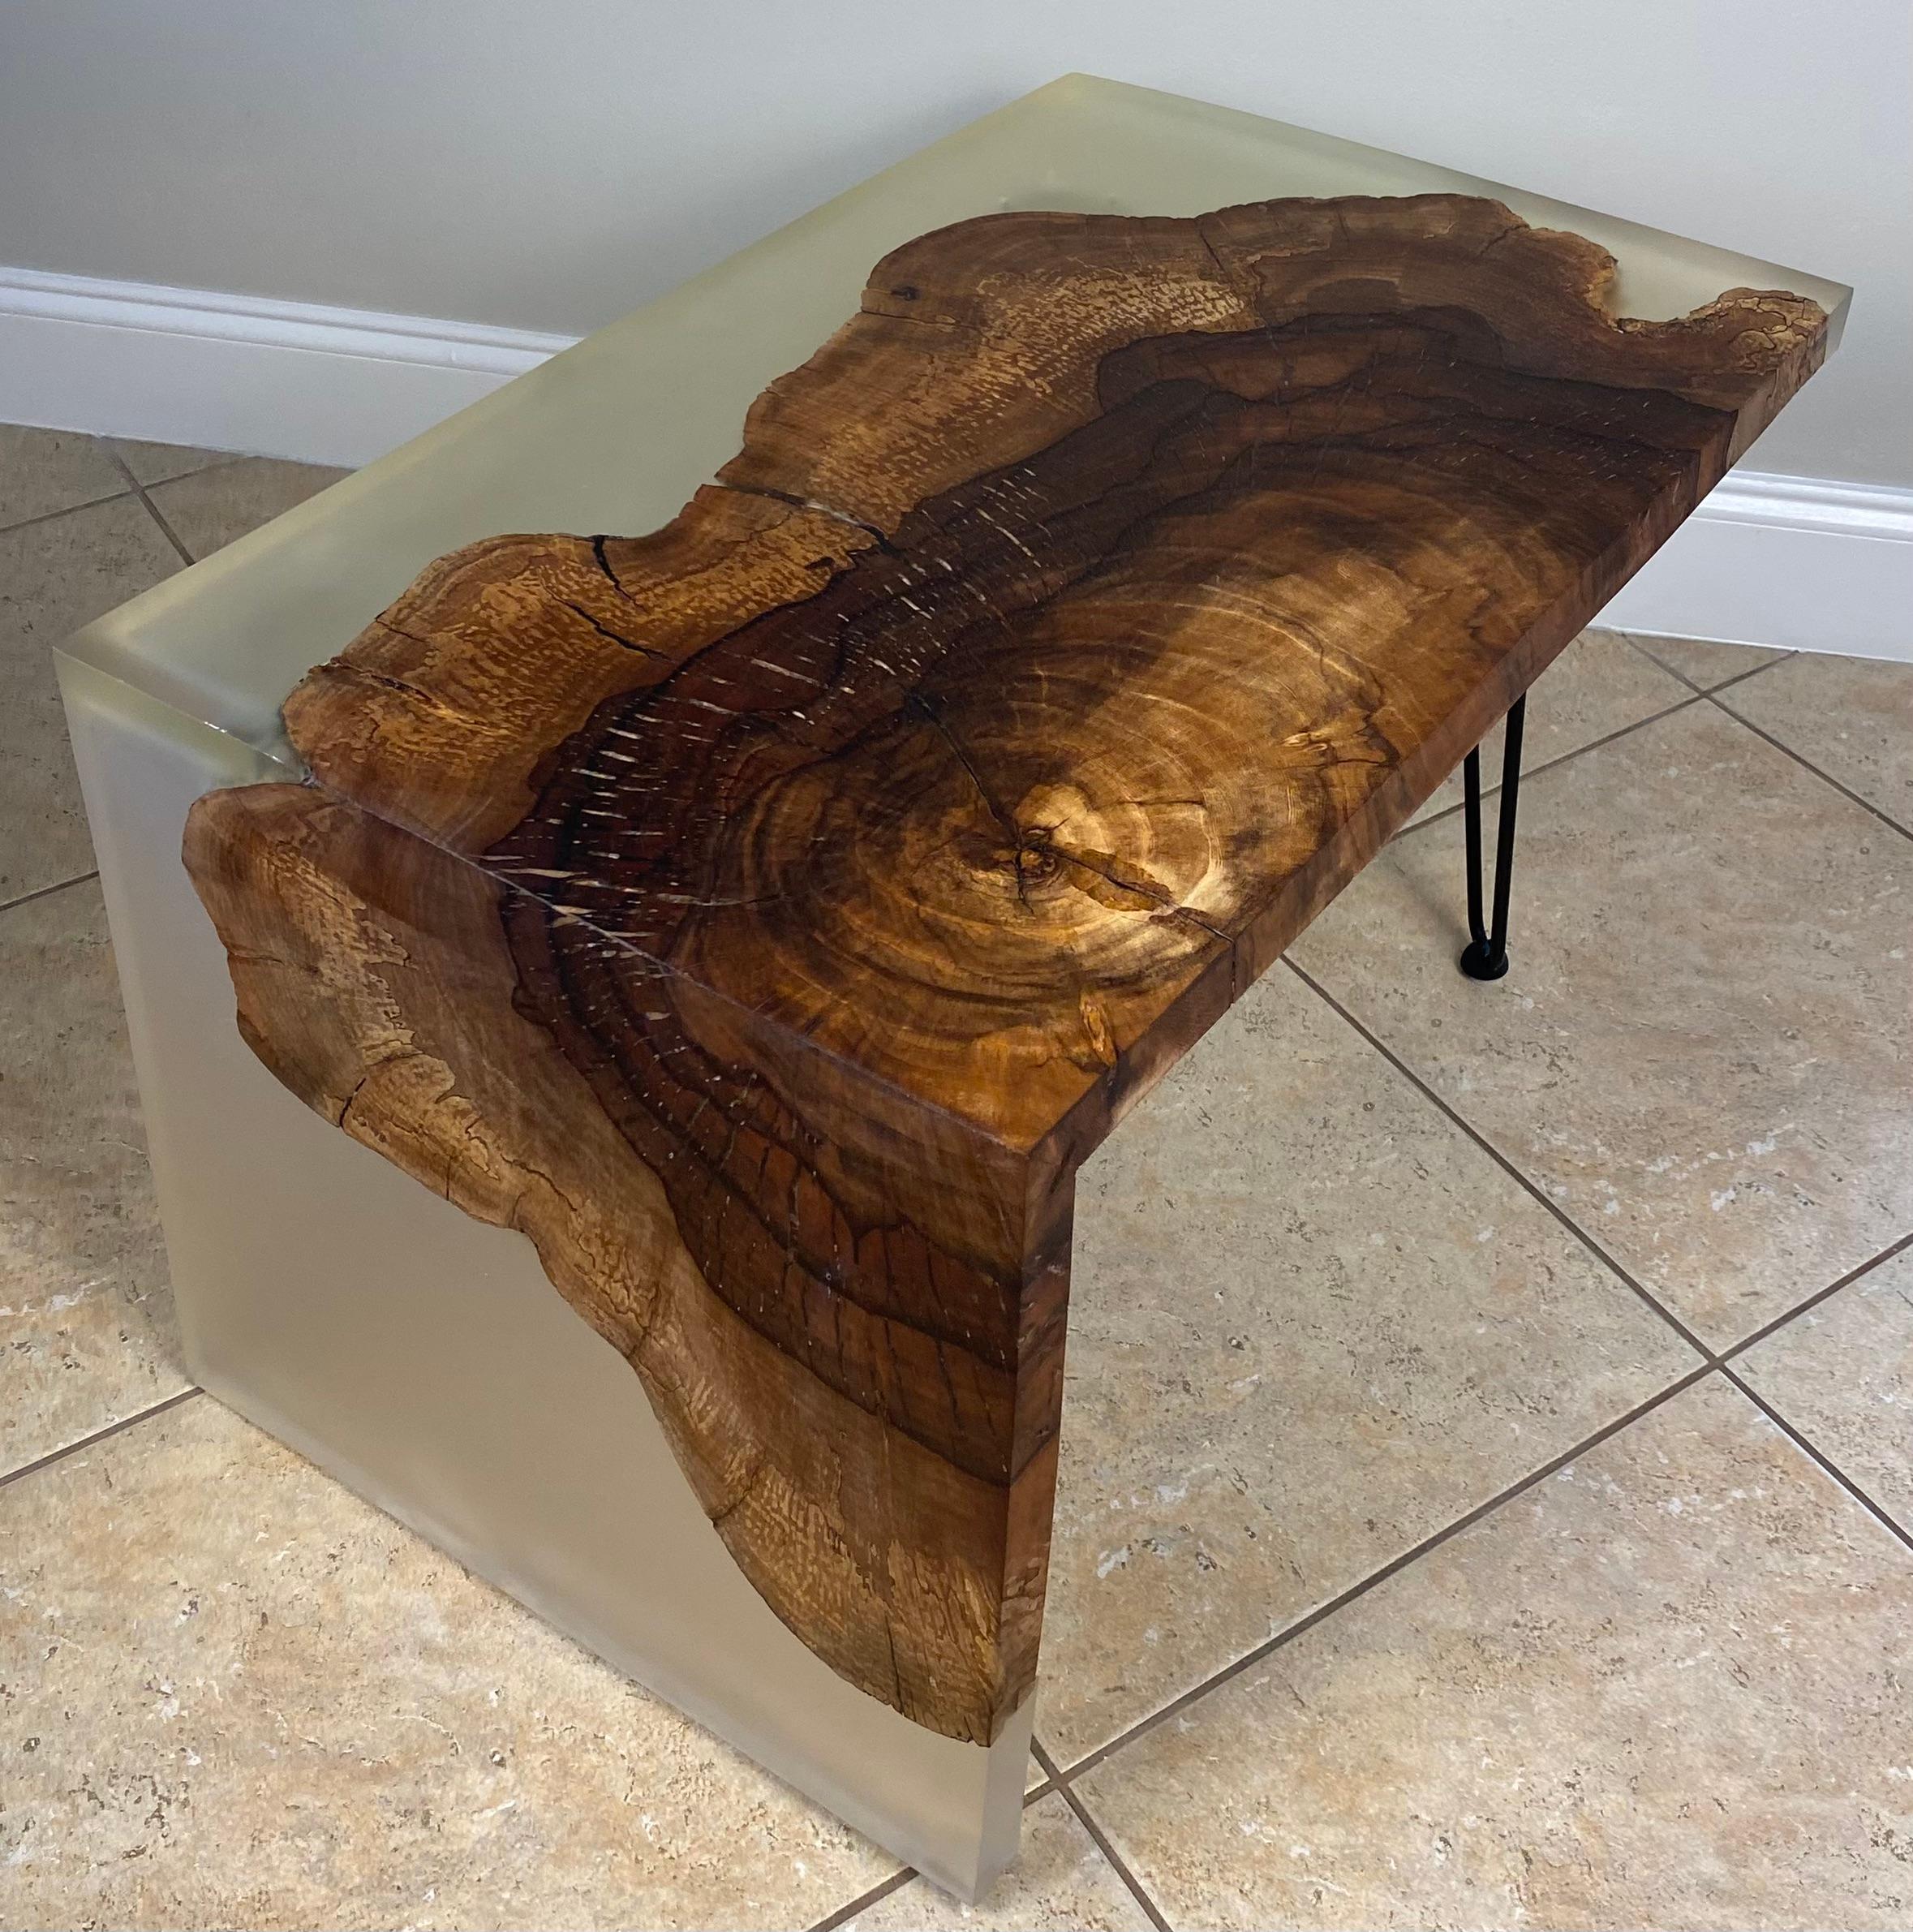 Stylish mid-century modern coffee table or when separated a pair of mid-century end tables.
Wonderfully constructed of wood and resin with a cantilevered design. 

Dimensions:
separate end tables 18 1/2